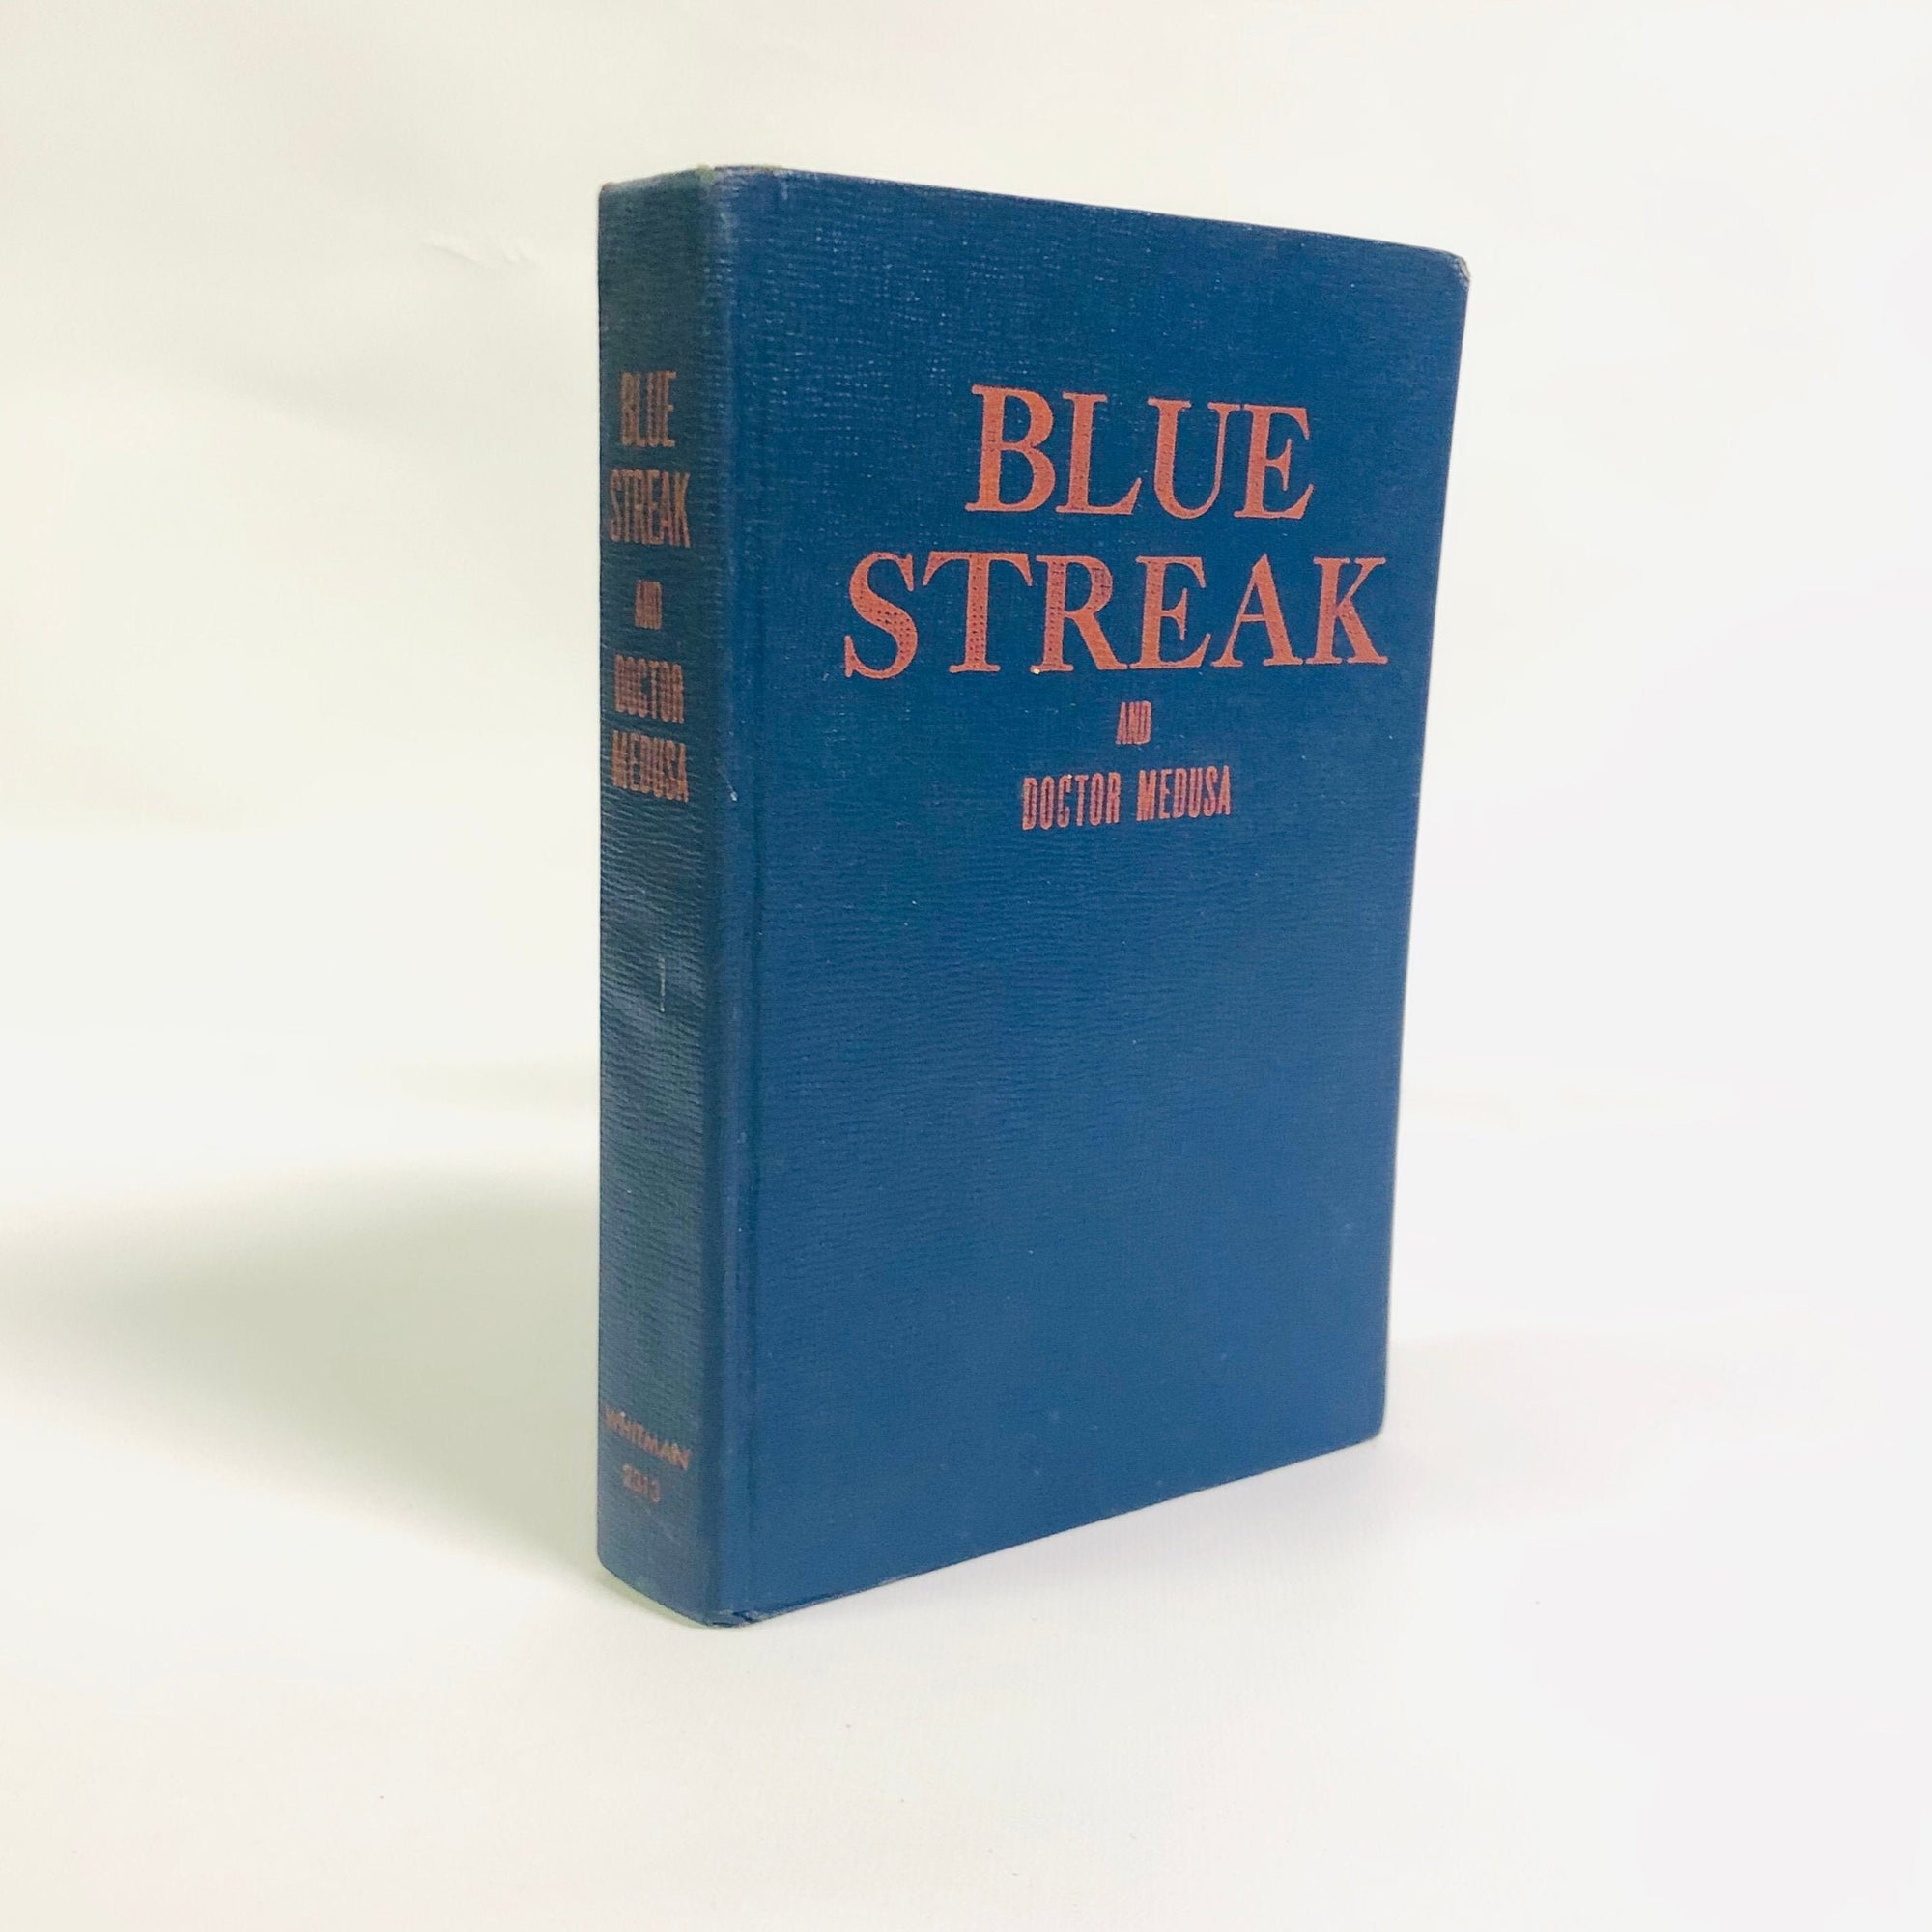 Blue Streak and Doctor Medusa by Art Elder 1946 A First Edition Action Book Vintage Book